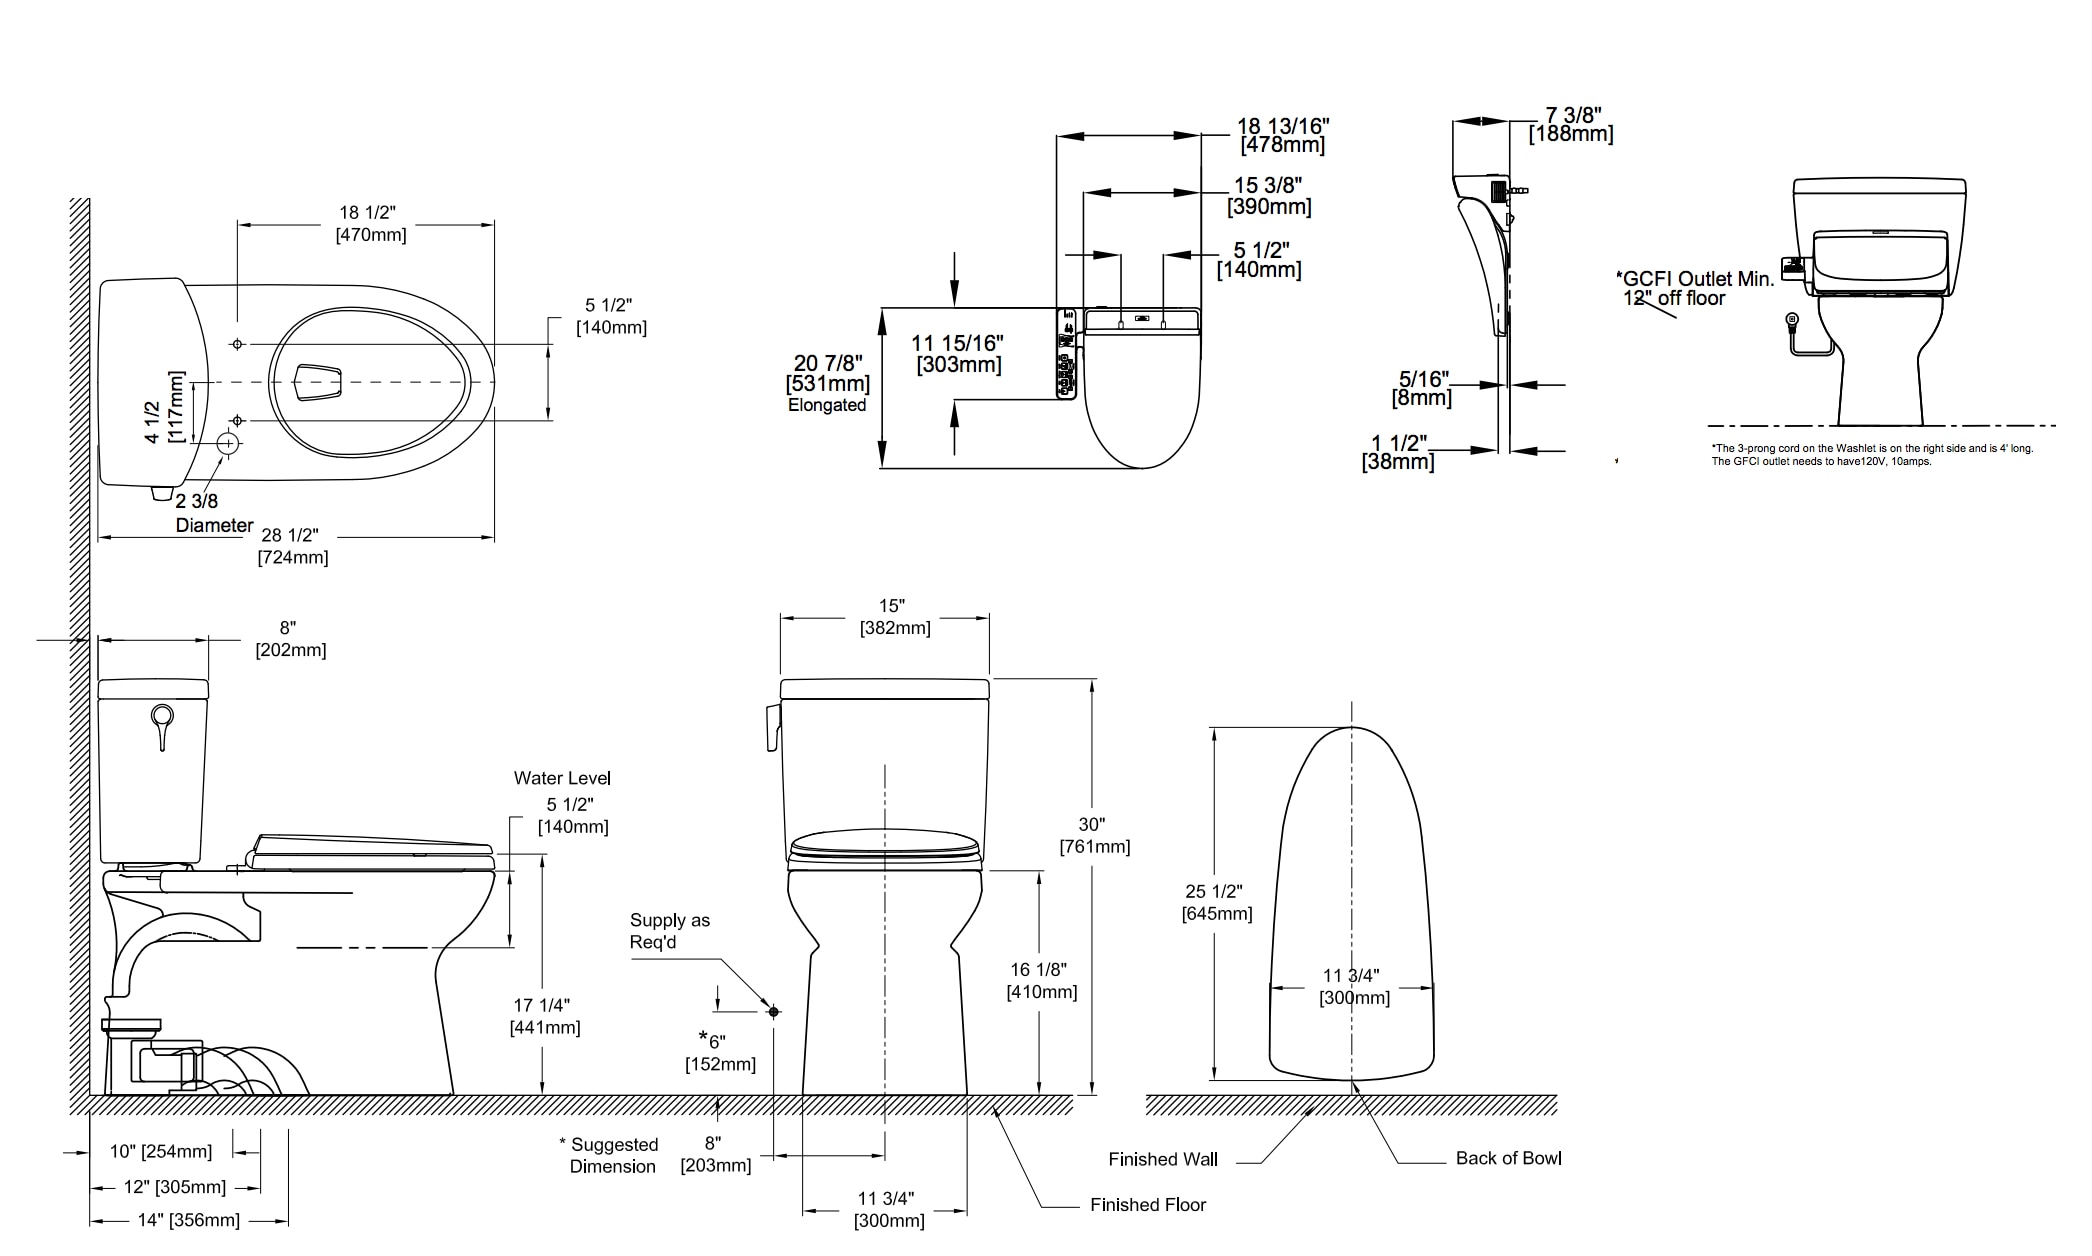 toto-vespin-ii-1g-washlet-c100-two-piece-toilet-and-bidet-system-1.0-gpf-diagram.png